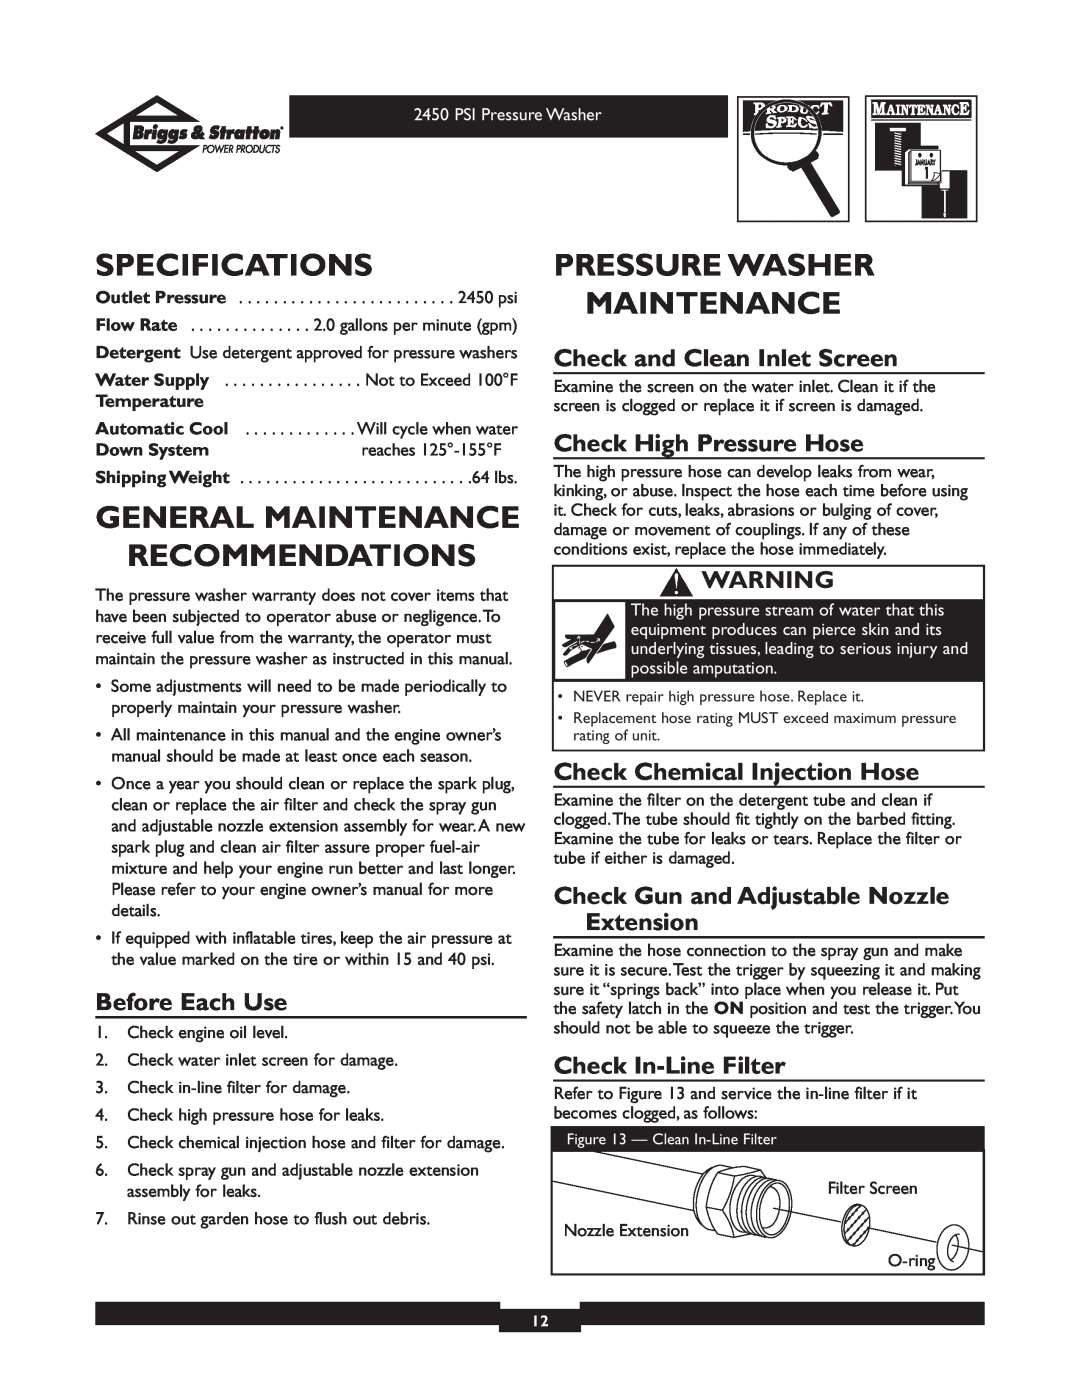 Briggs & Stratton 020219 Specifications, General Maintenance Recommendations, Pressure Washer Maintenance, Before Each Use 